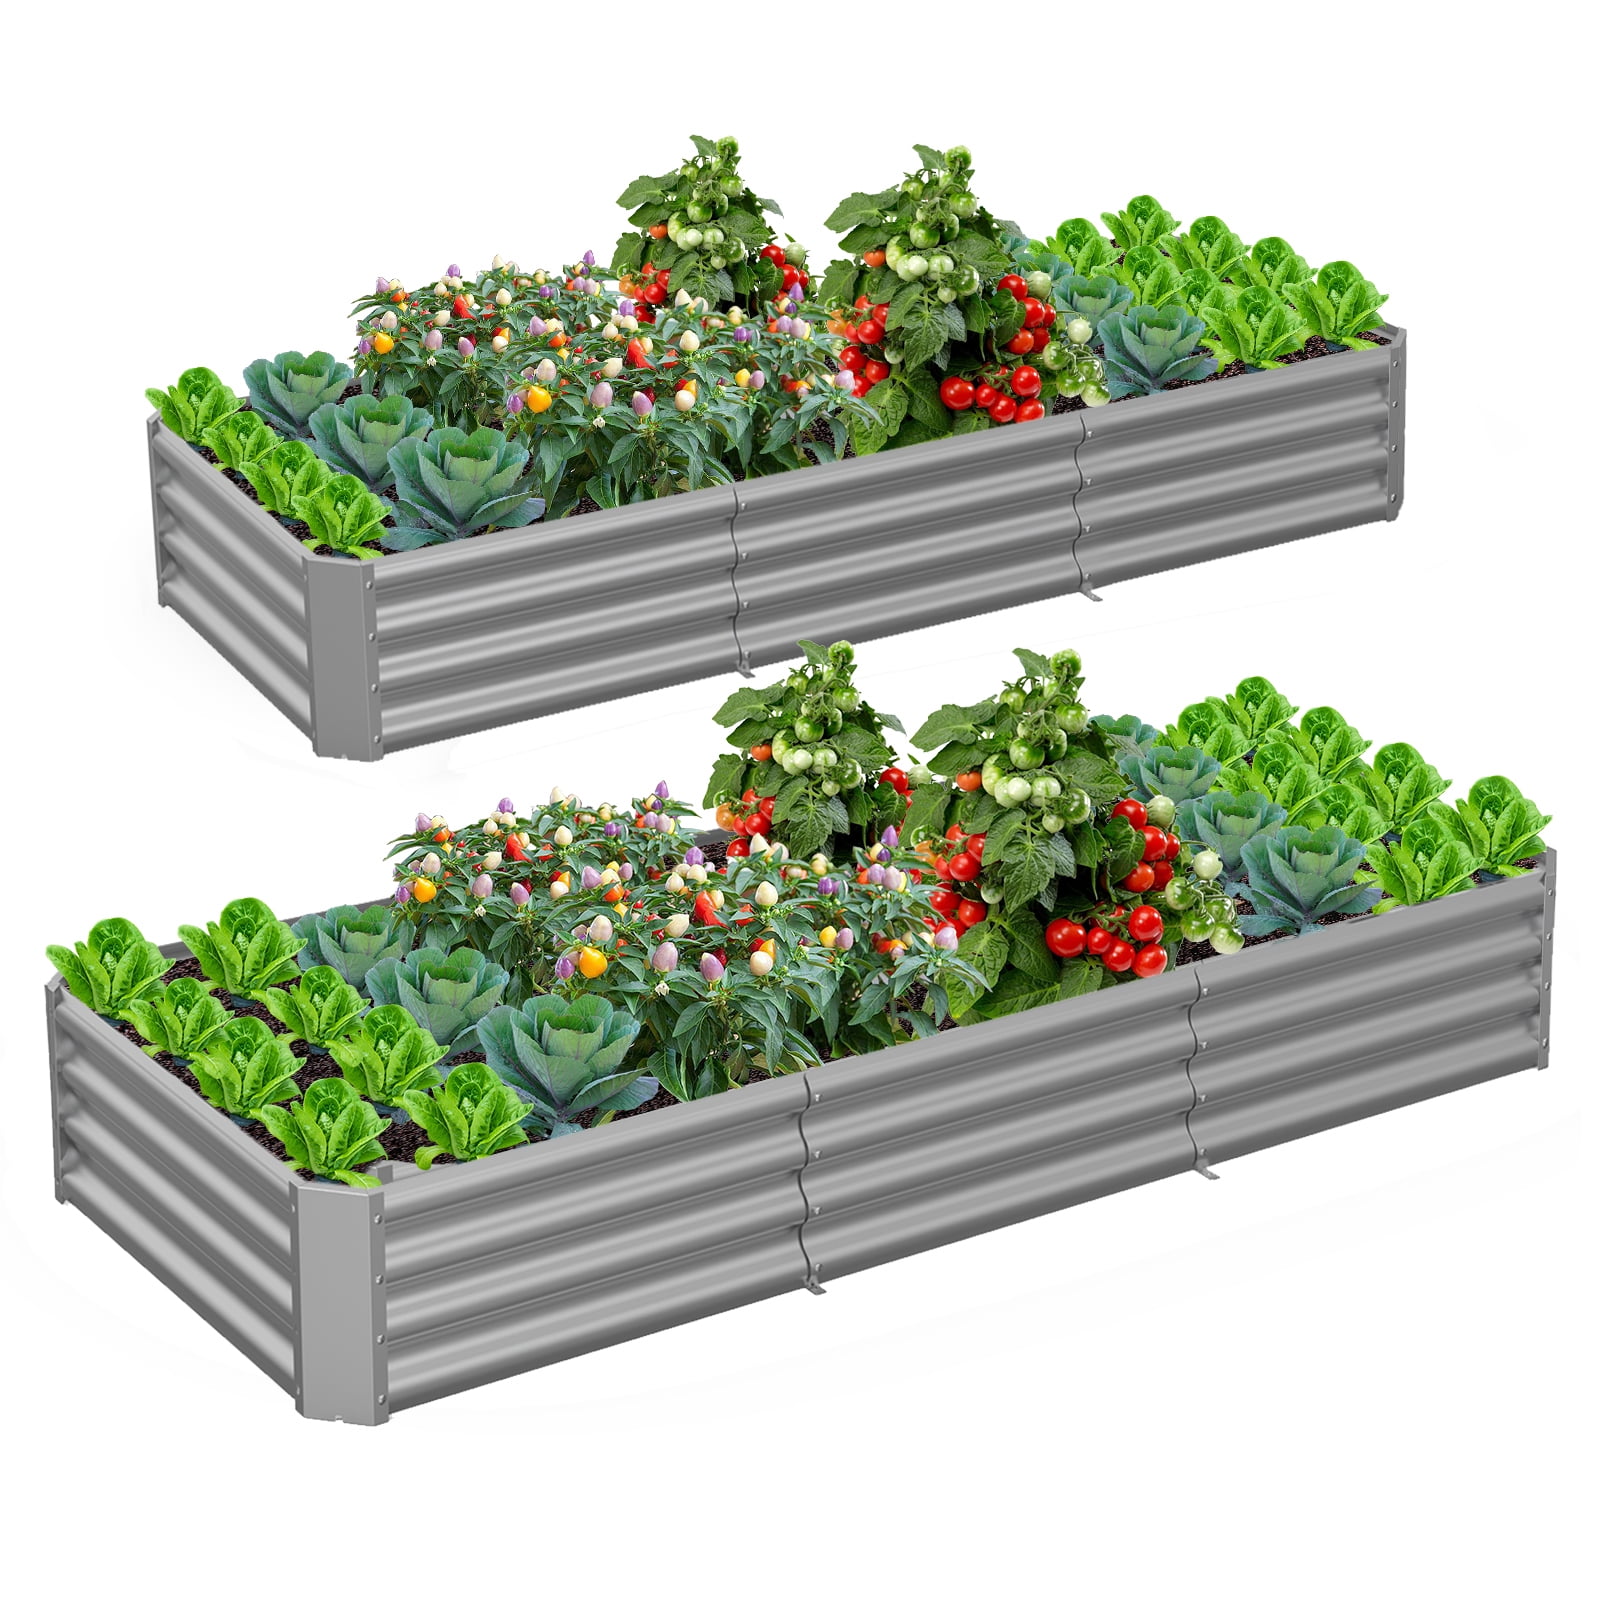 TRAMULL 2 Pack 8x3x1ft Metal Galvanized Raised Garden Bed for Vegetables Flowers Ground Planter Box (Gray) - image 1 of 7